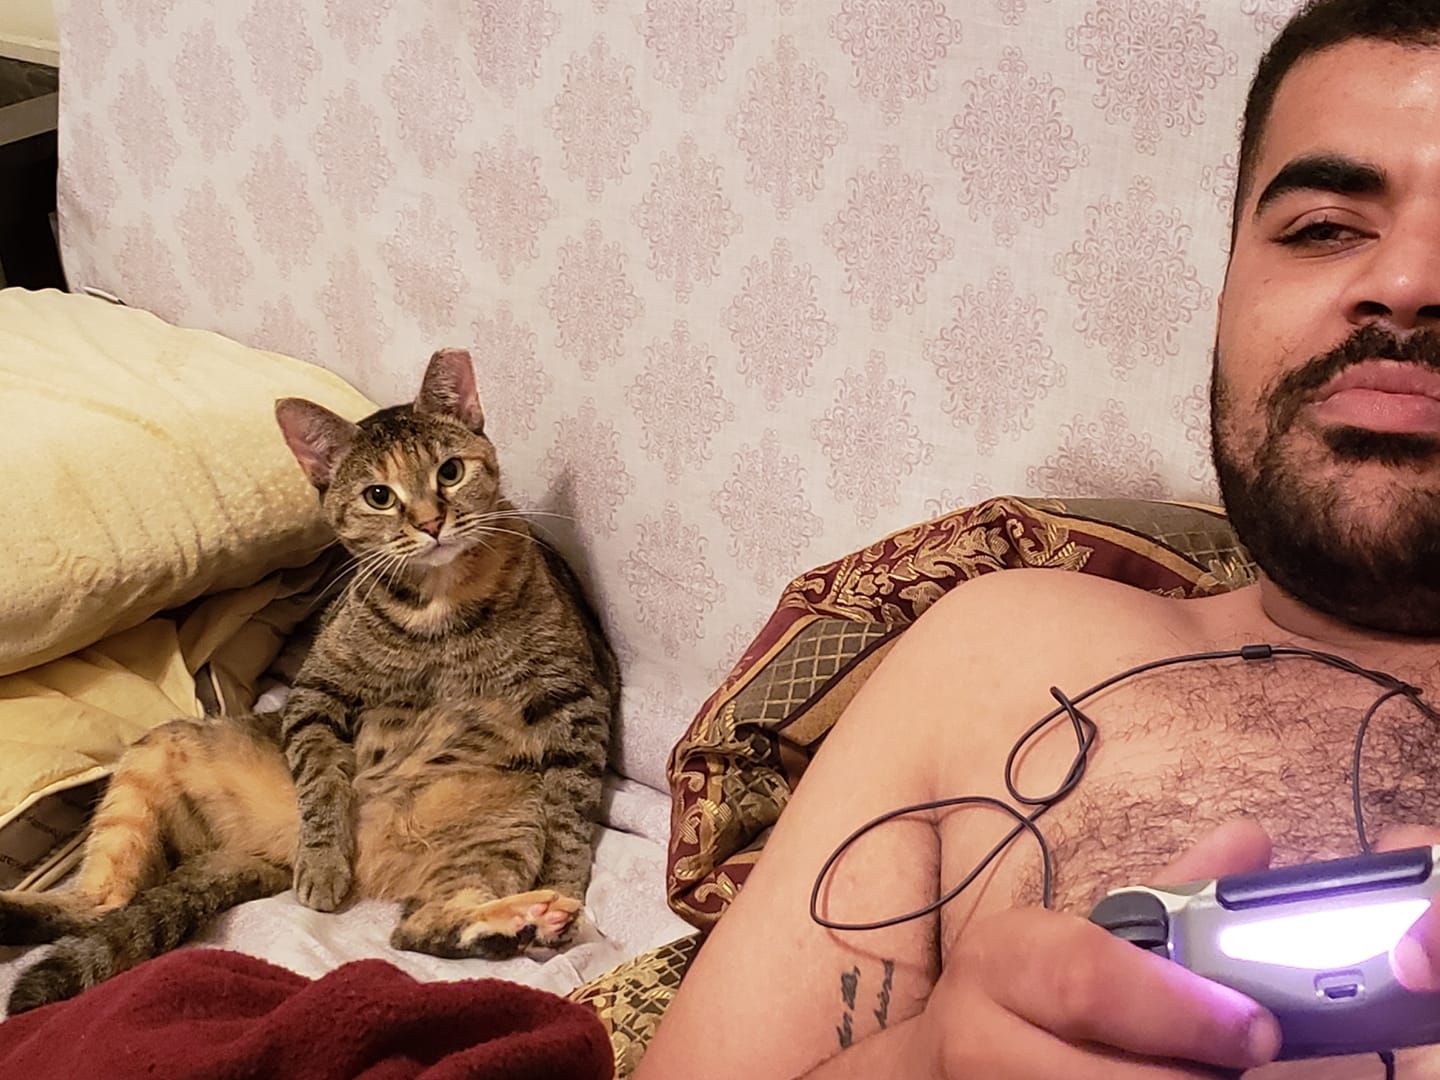 Yes I have a hairy chest but that's not what is important here look at how me and my cat chill while I play videogames